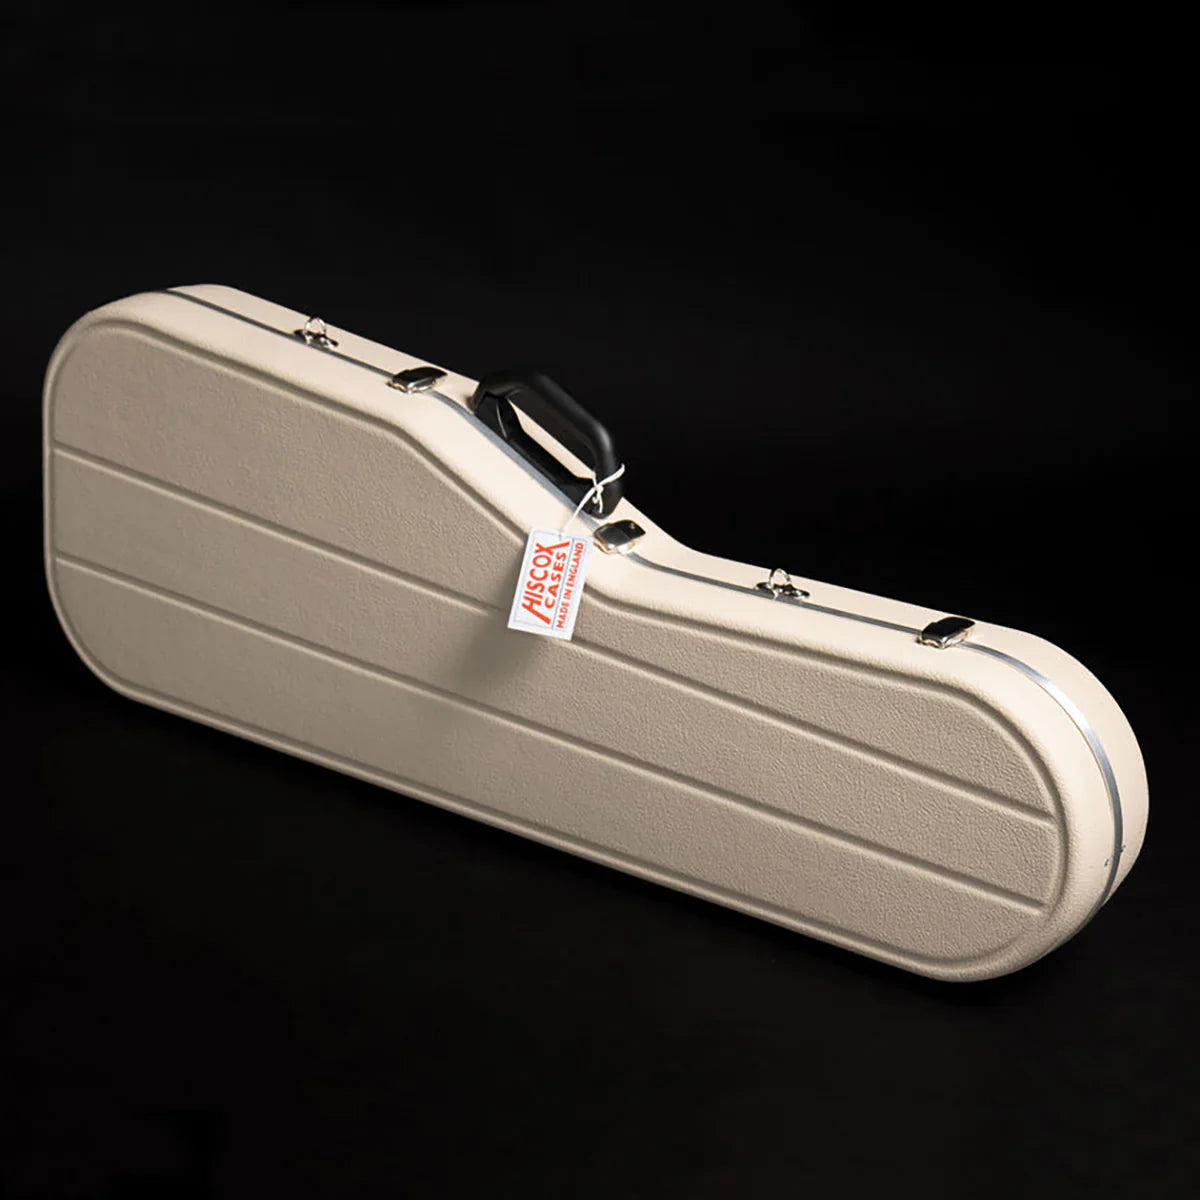 Hiscox SG Electric Guitar Case - Ivory/Silver (preorder)